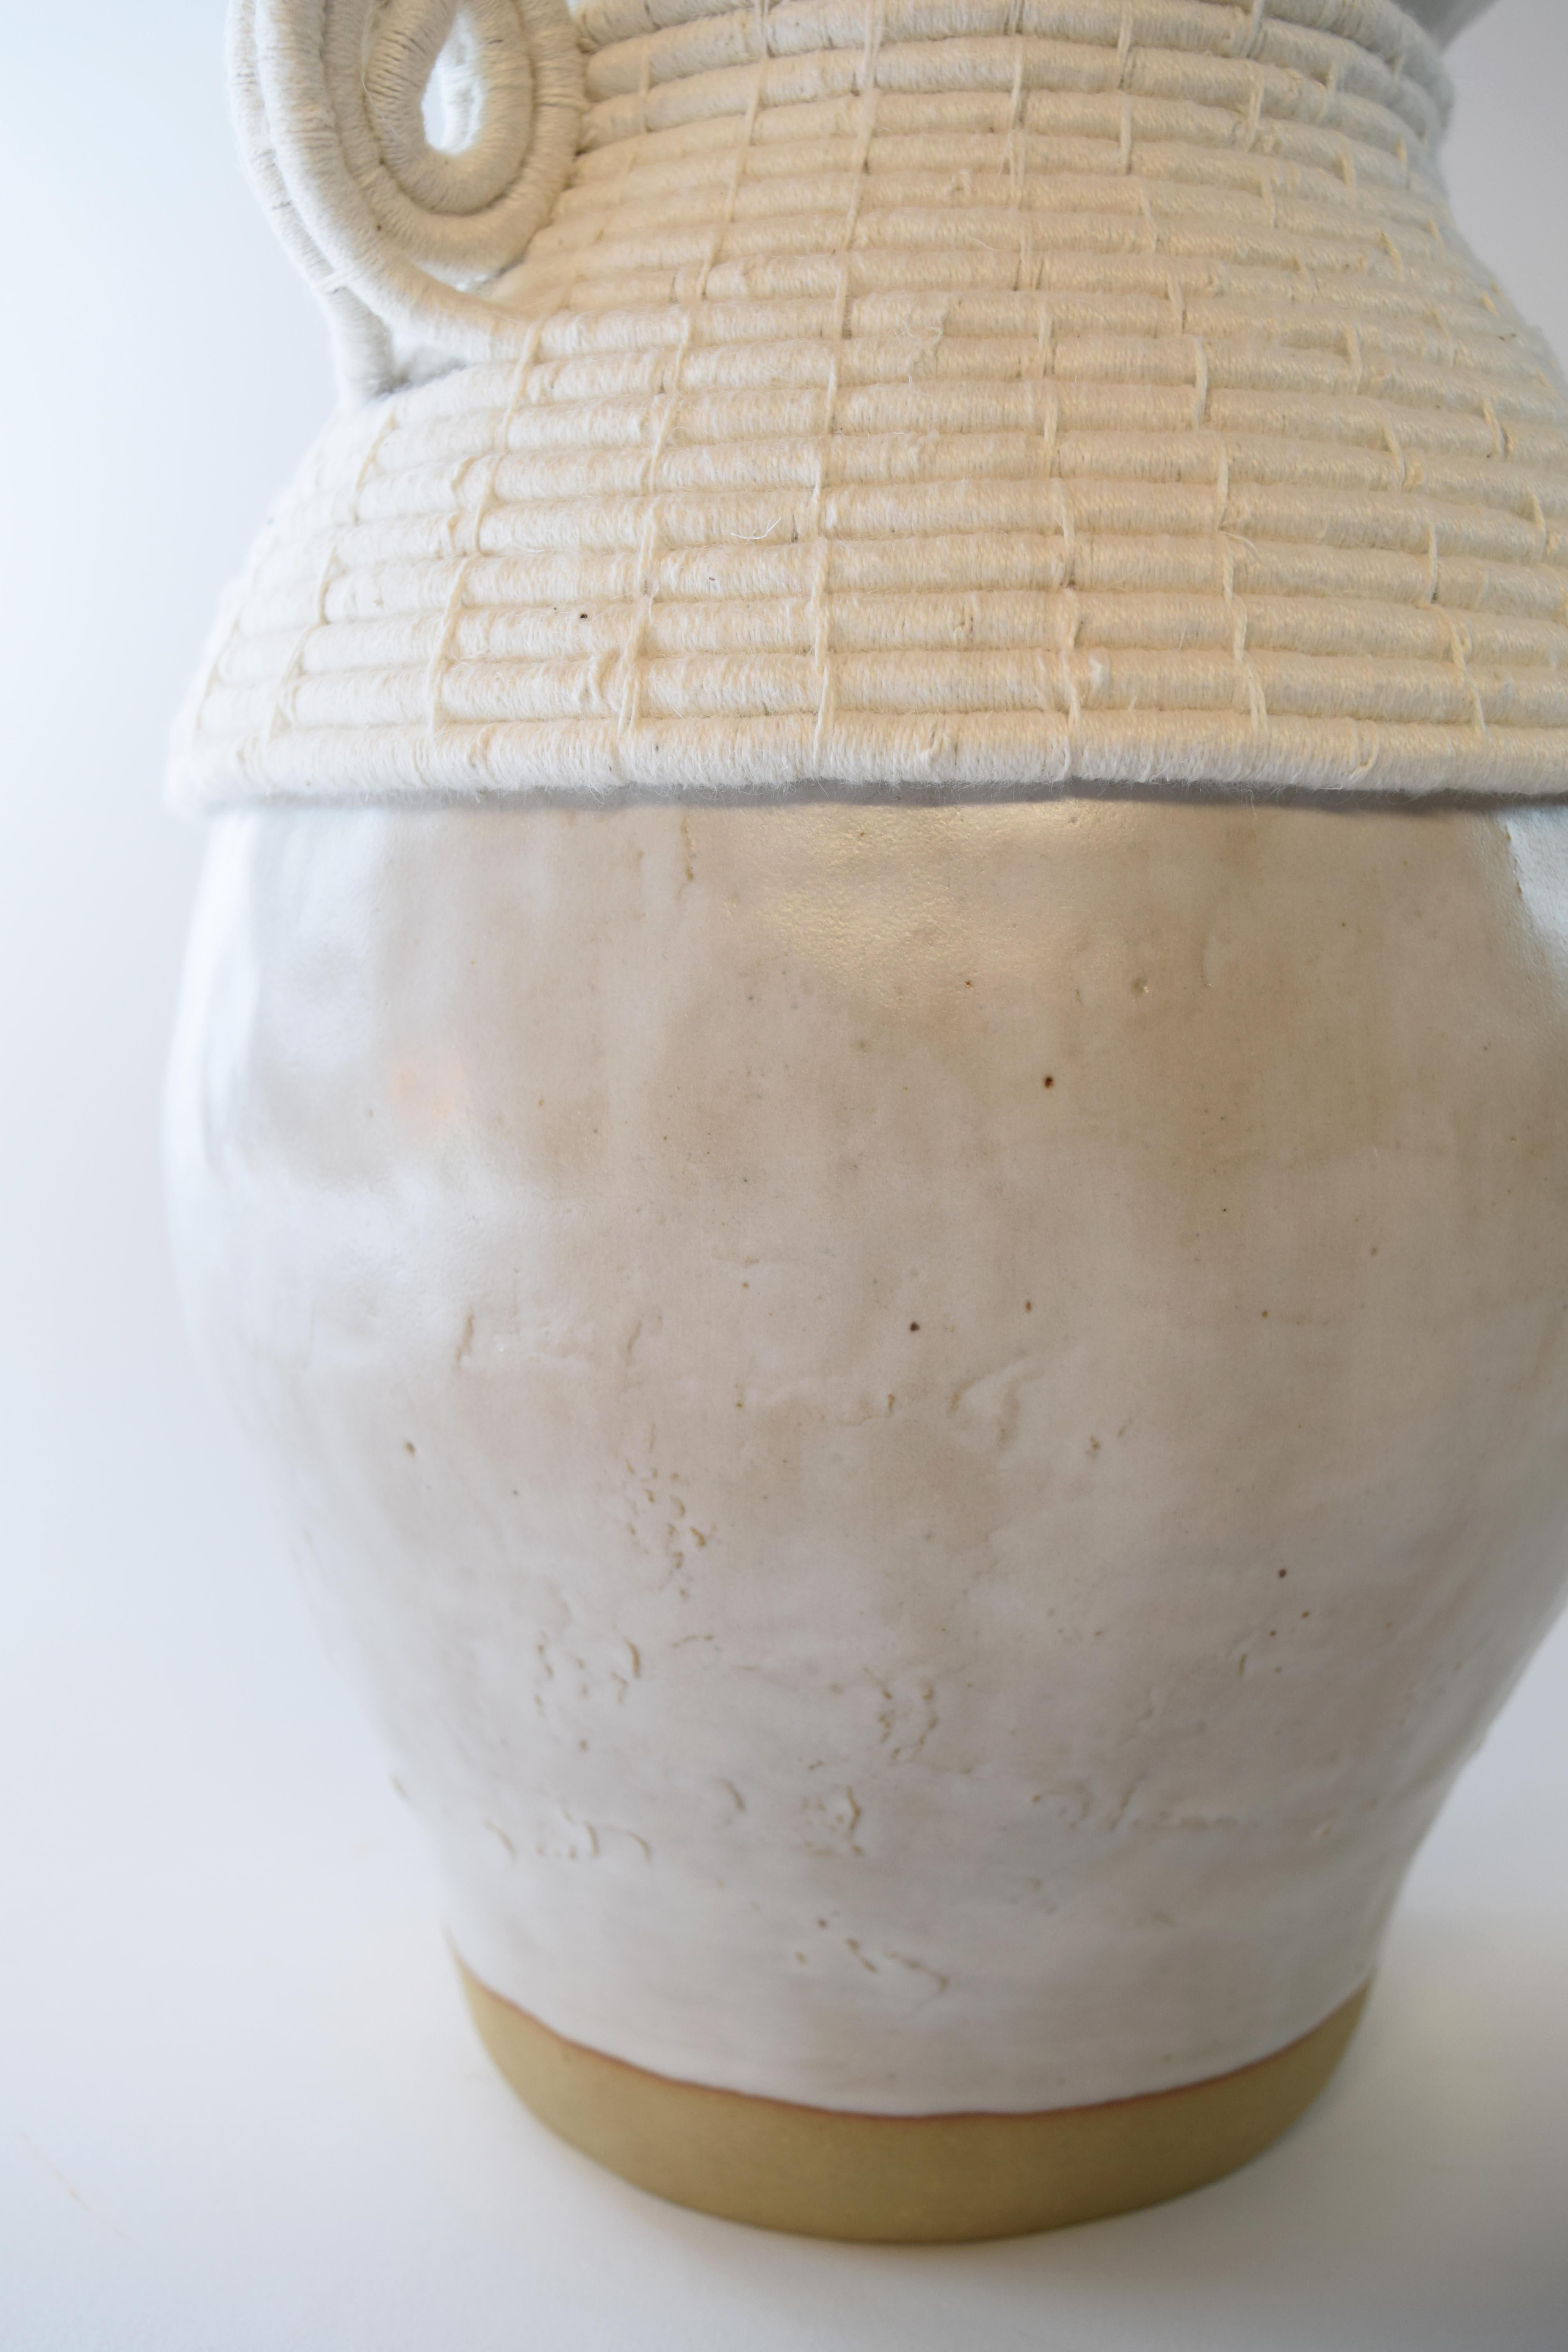 Hand-Crafted One of a Kind Ceramic Vase #766, Satin White Glaze & Woven Cotton Detail